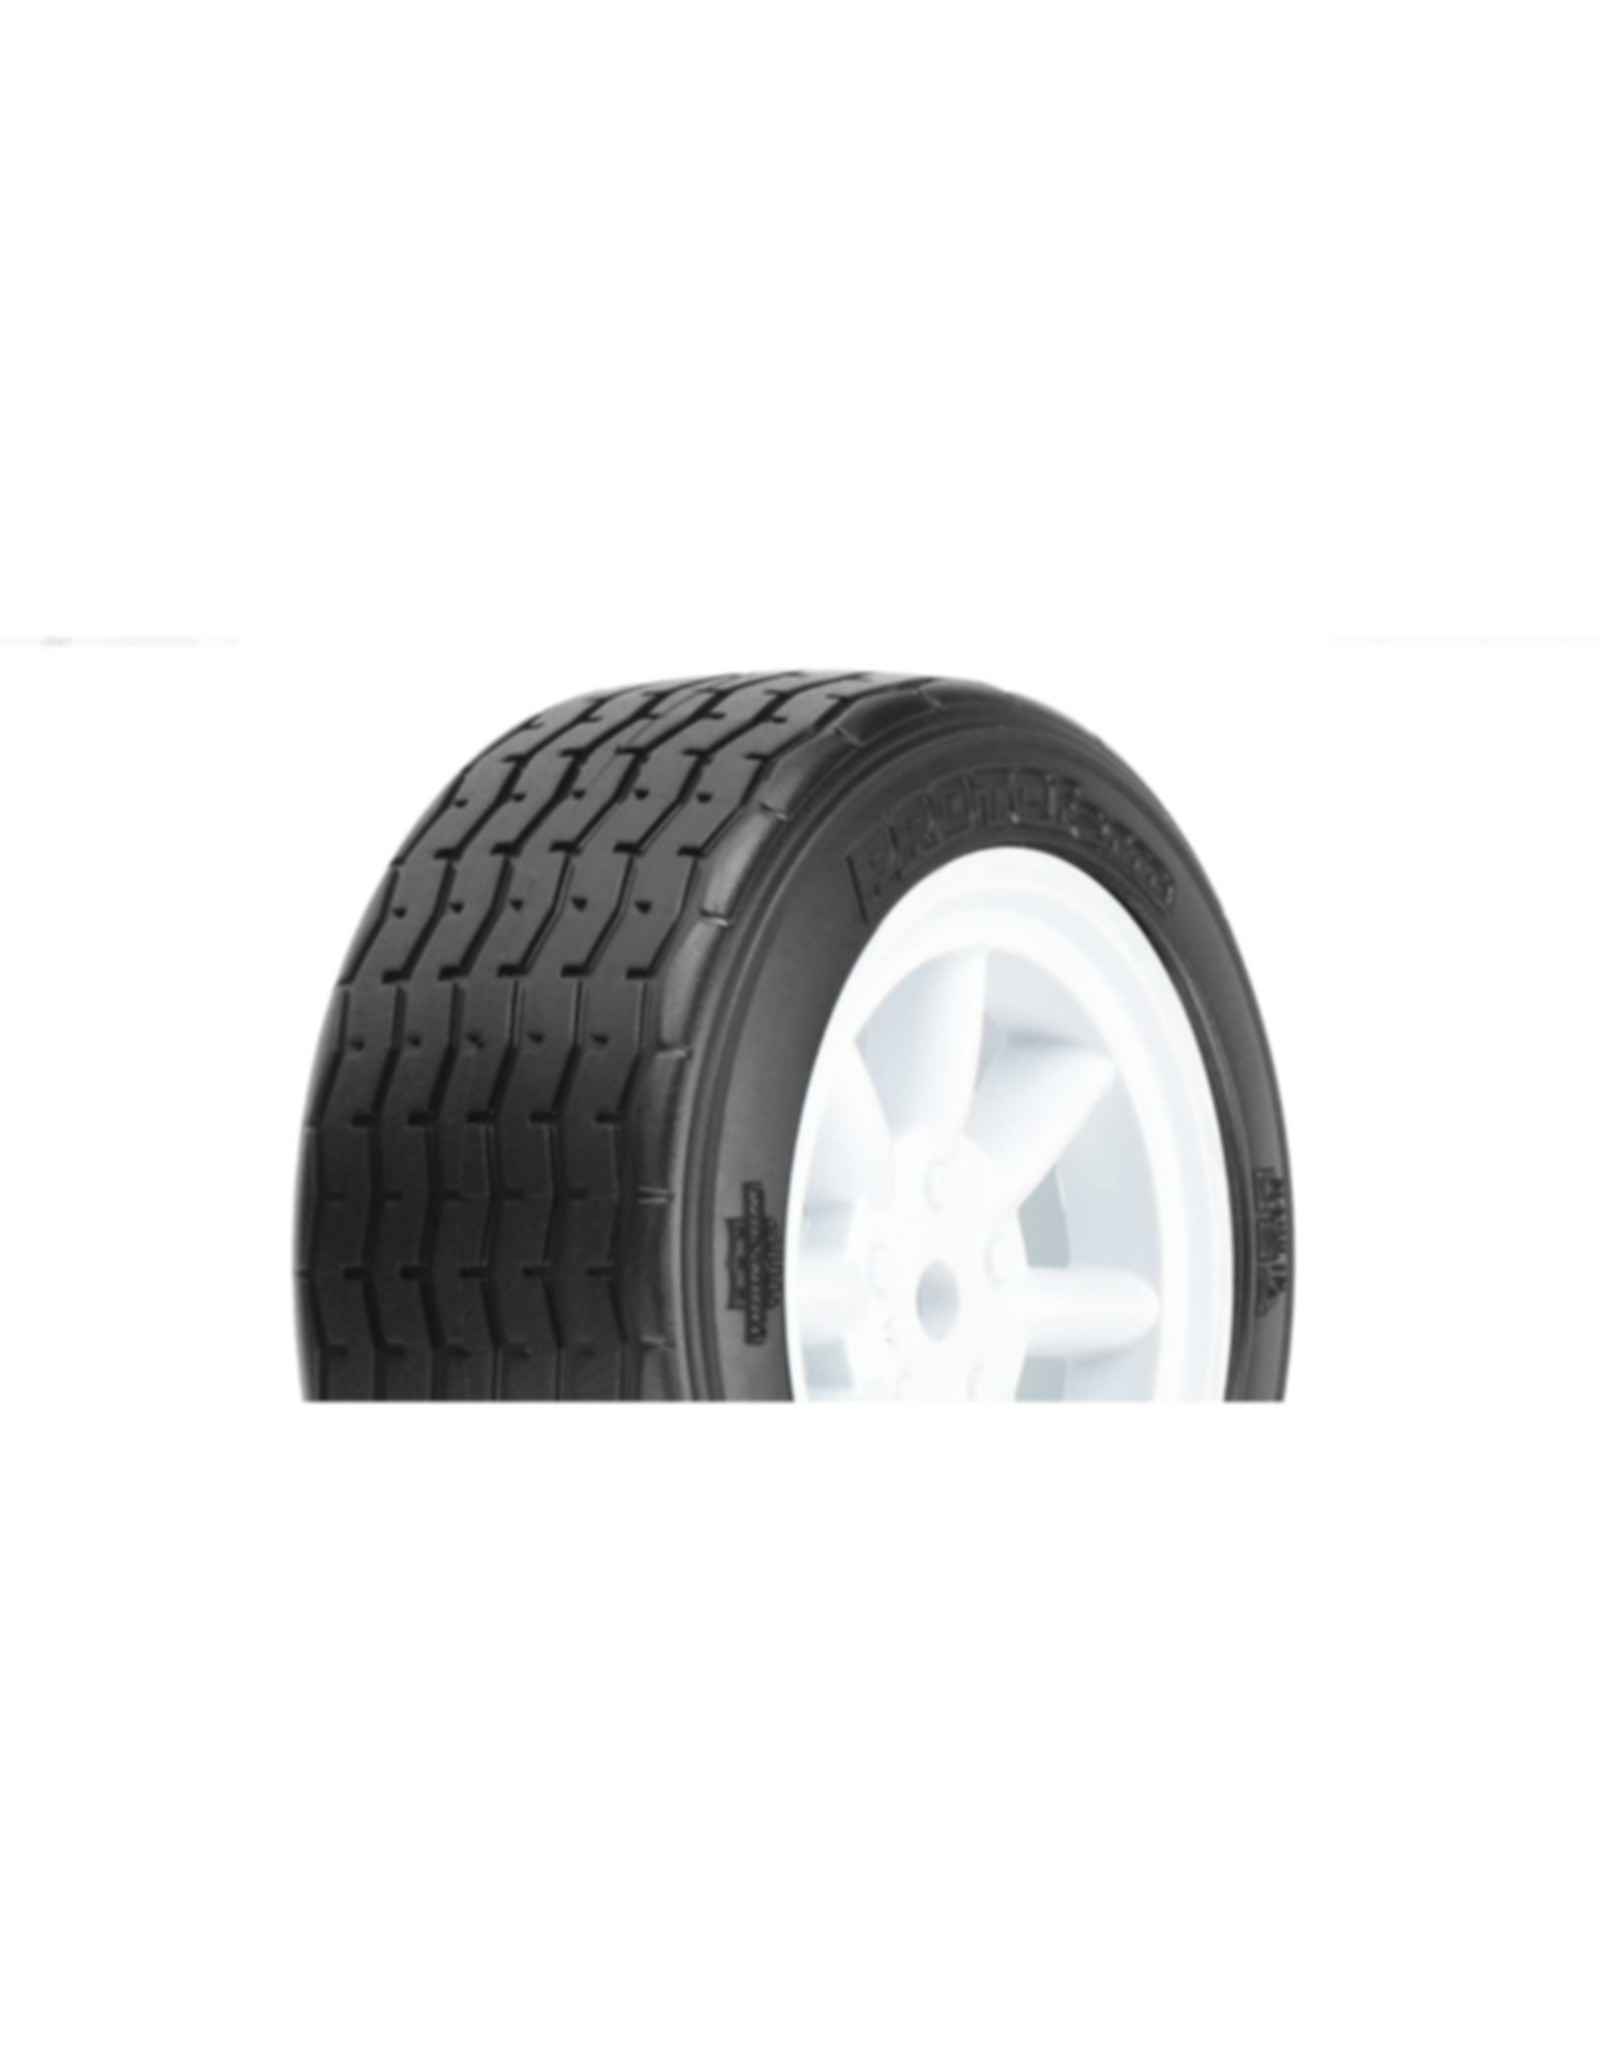 Pro-Line Racing PRM1014017 VTA Front Tire, 26mm, Mounted White Wheel